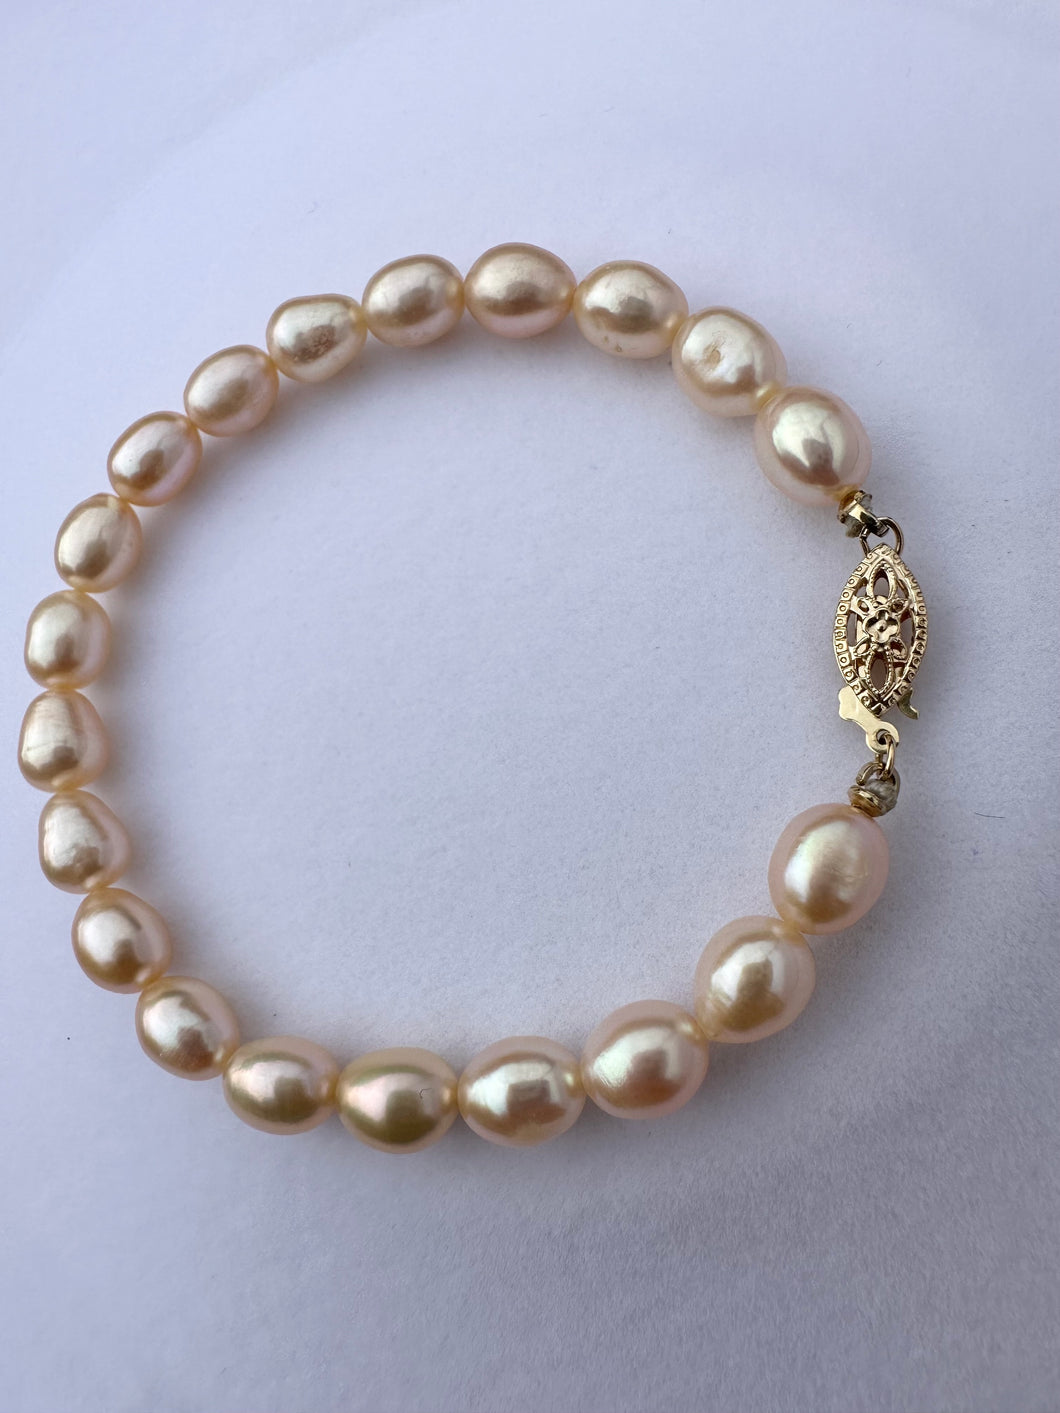 #400 - 7”, 14kt Yellow Gold, Chinese Freshwater Pearl Bracelet